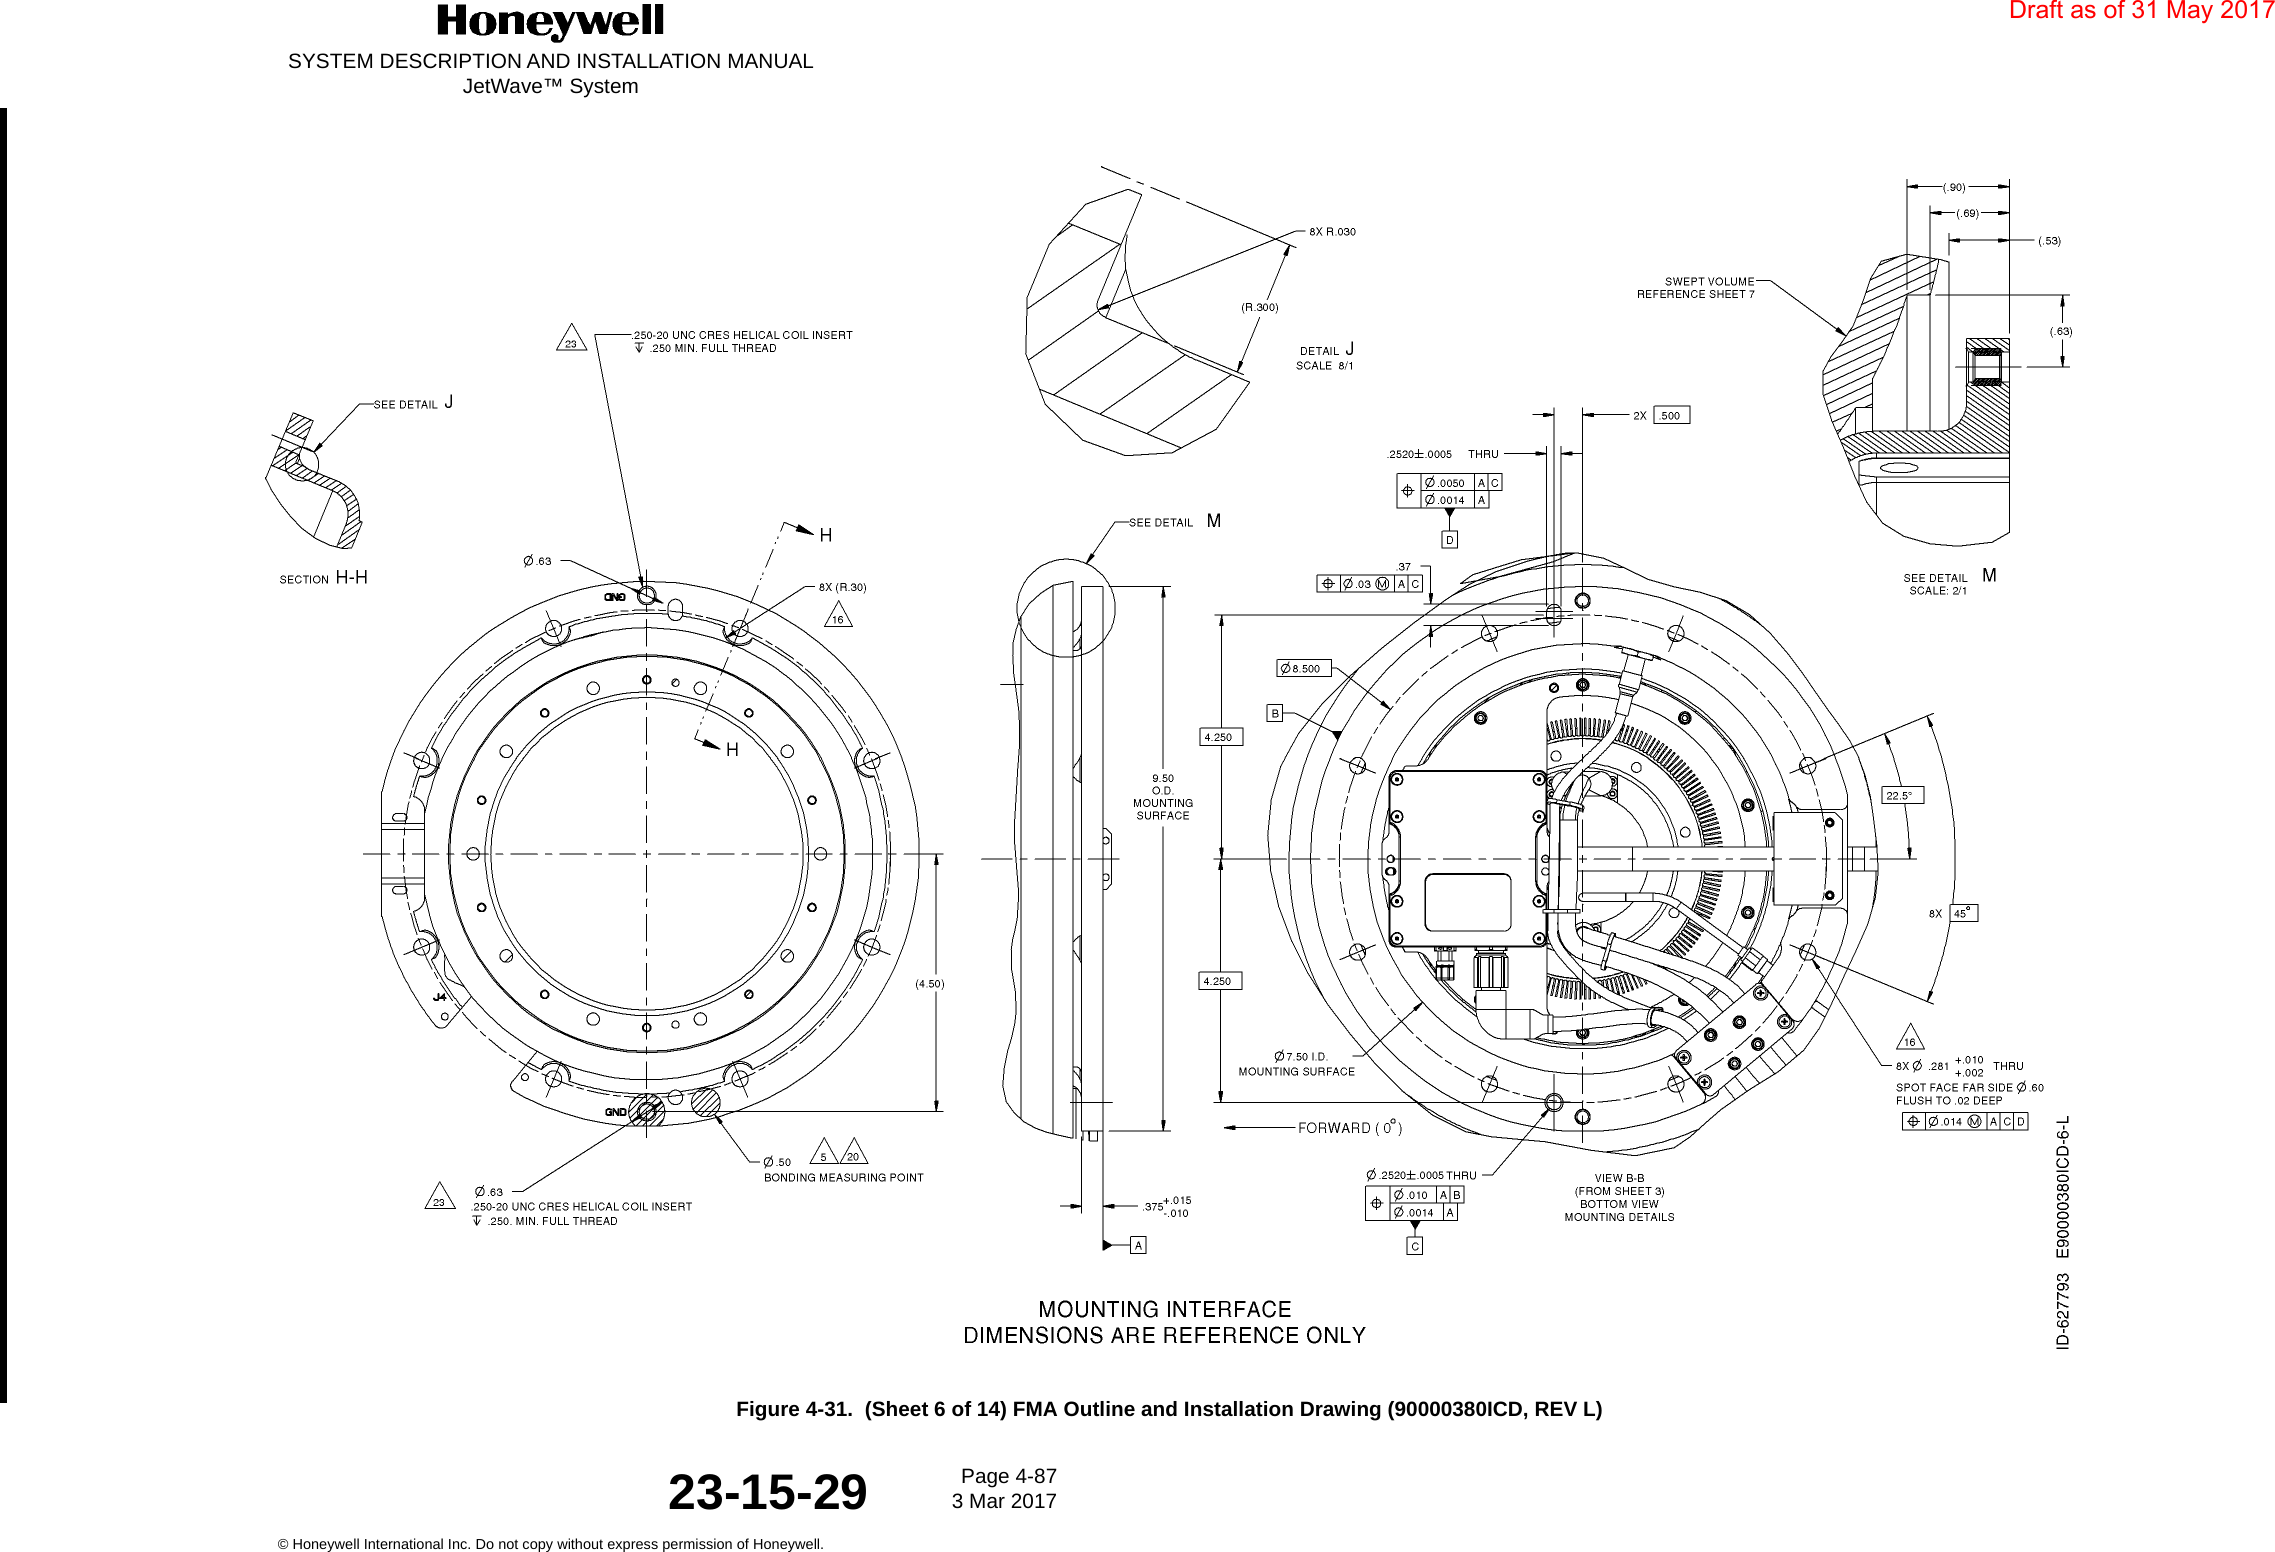 SYSTEM DESCRIPTION AND INSTALLATION MANUALJetWave™ SystemPage 4-87 3 Mar 2017© Honeywell International Inc. Do not copy without express permission of Honeywell.23-15-29Figure 4-31.  (Sheet 6 of 14) FMA Outline and Installation Drawing (90000380ICD, REV L)Draft as of 31 May 2017